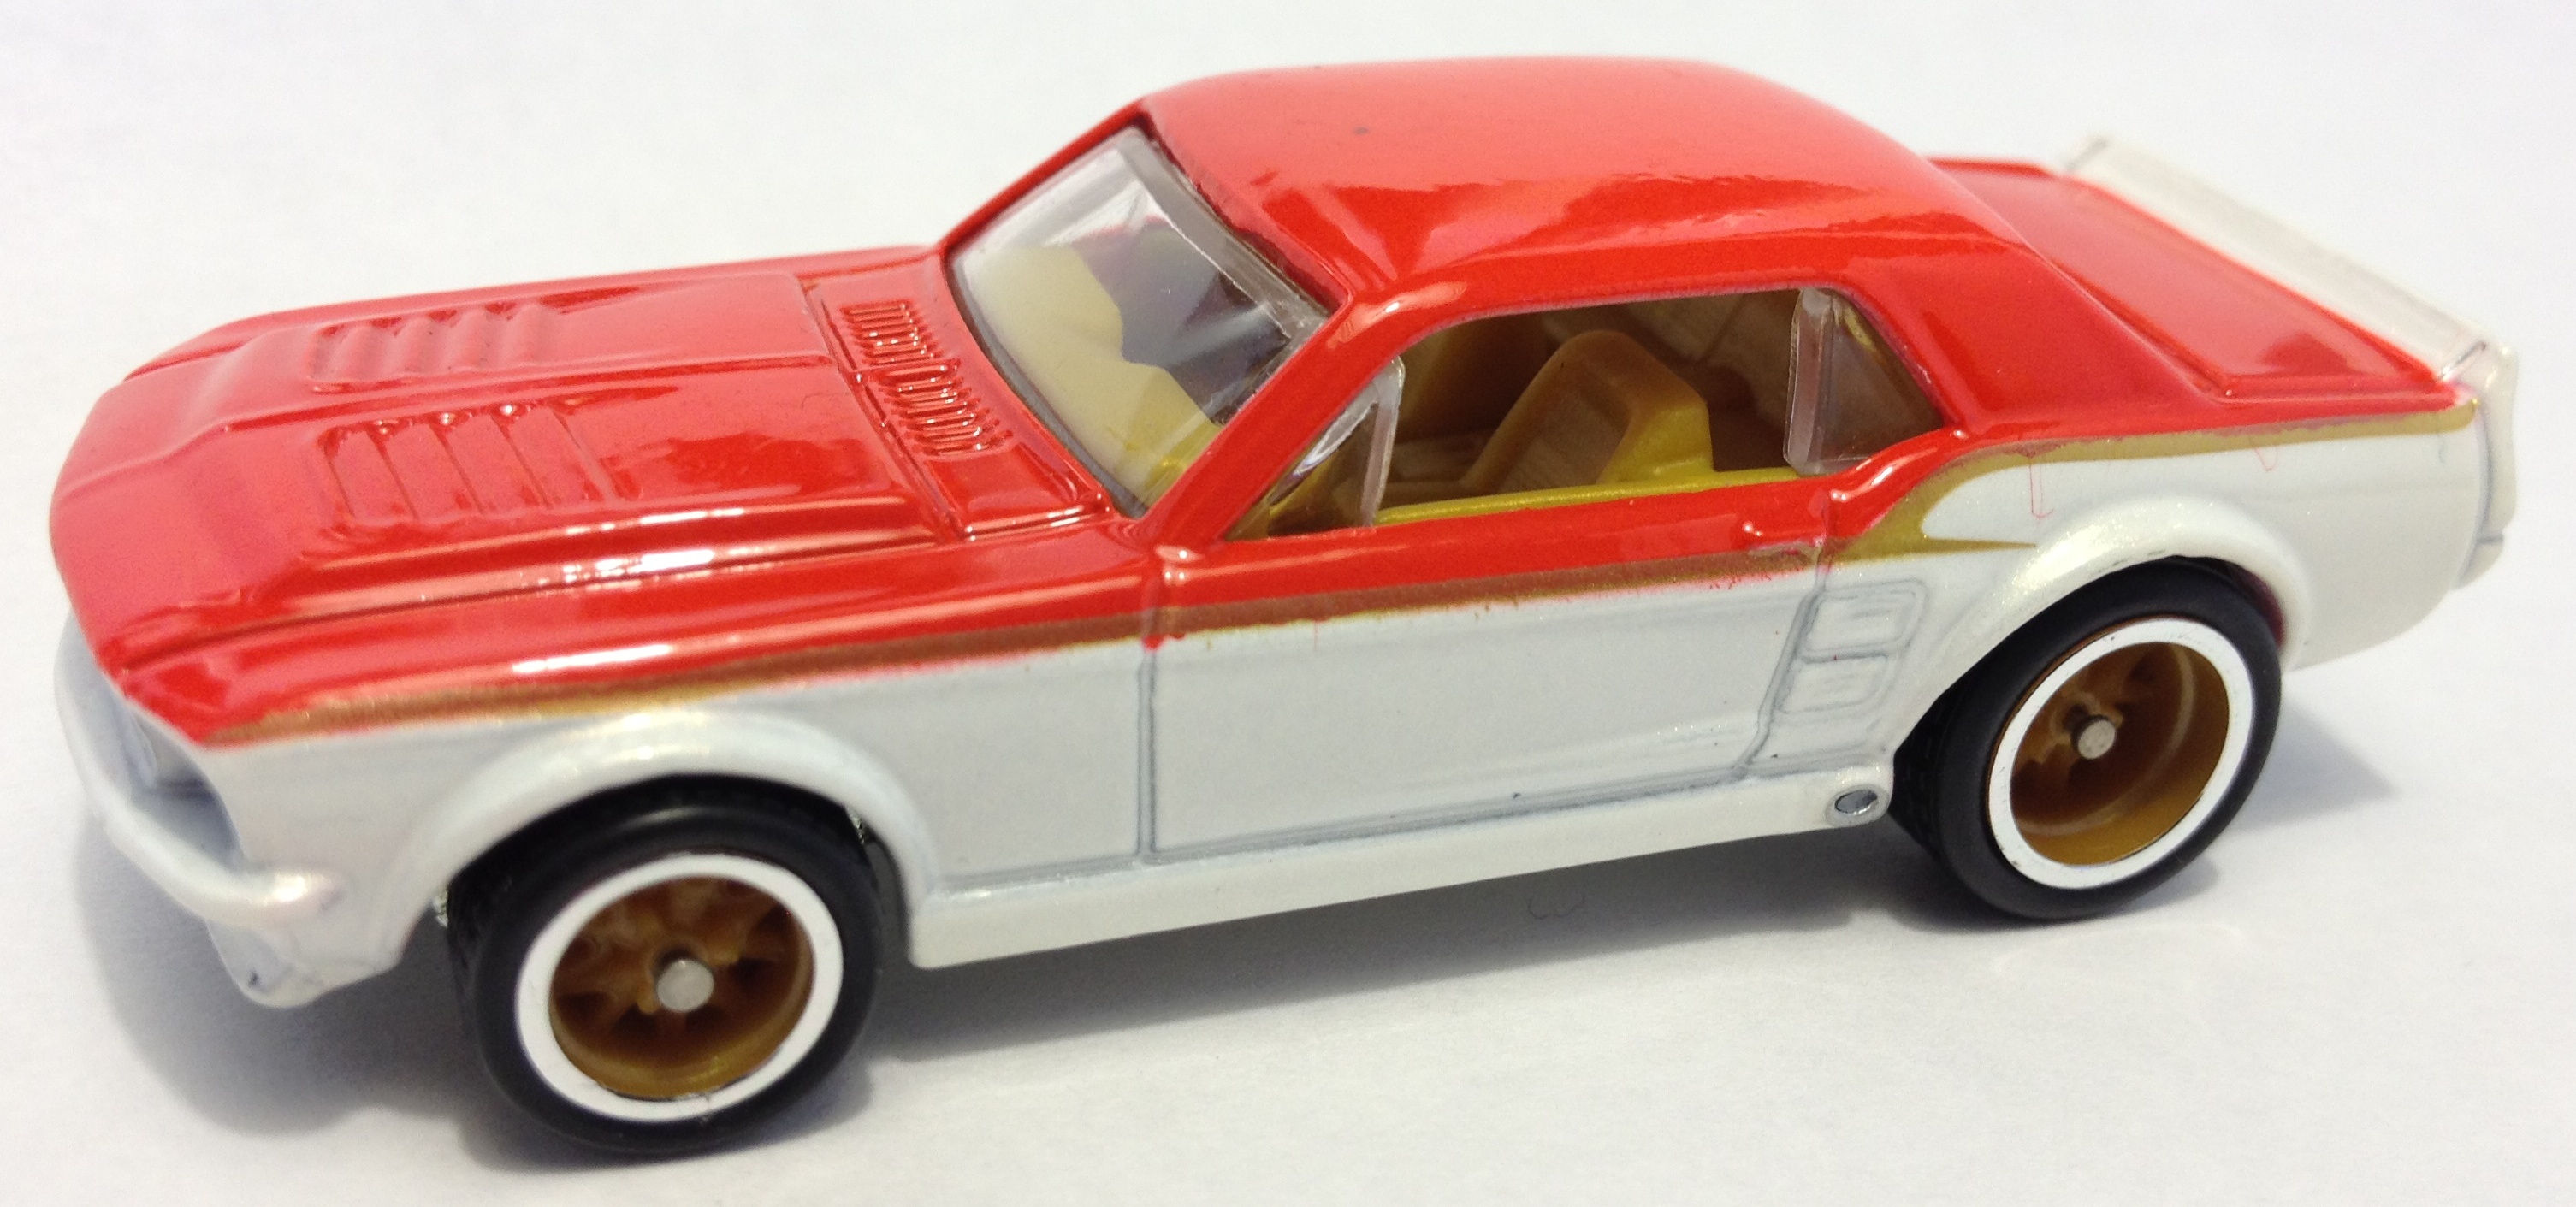 67 ford mustang gt hot wheels